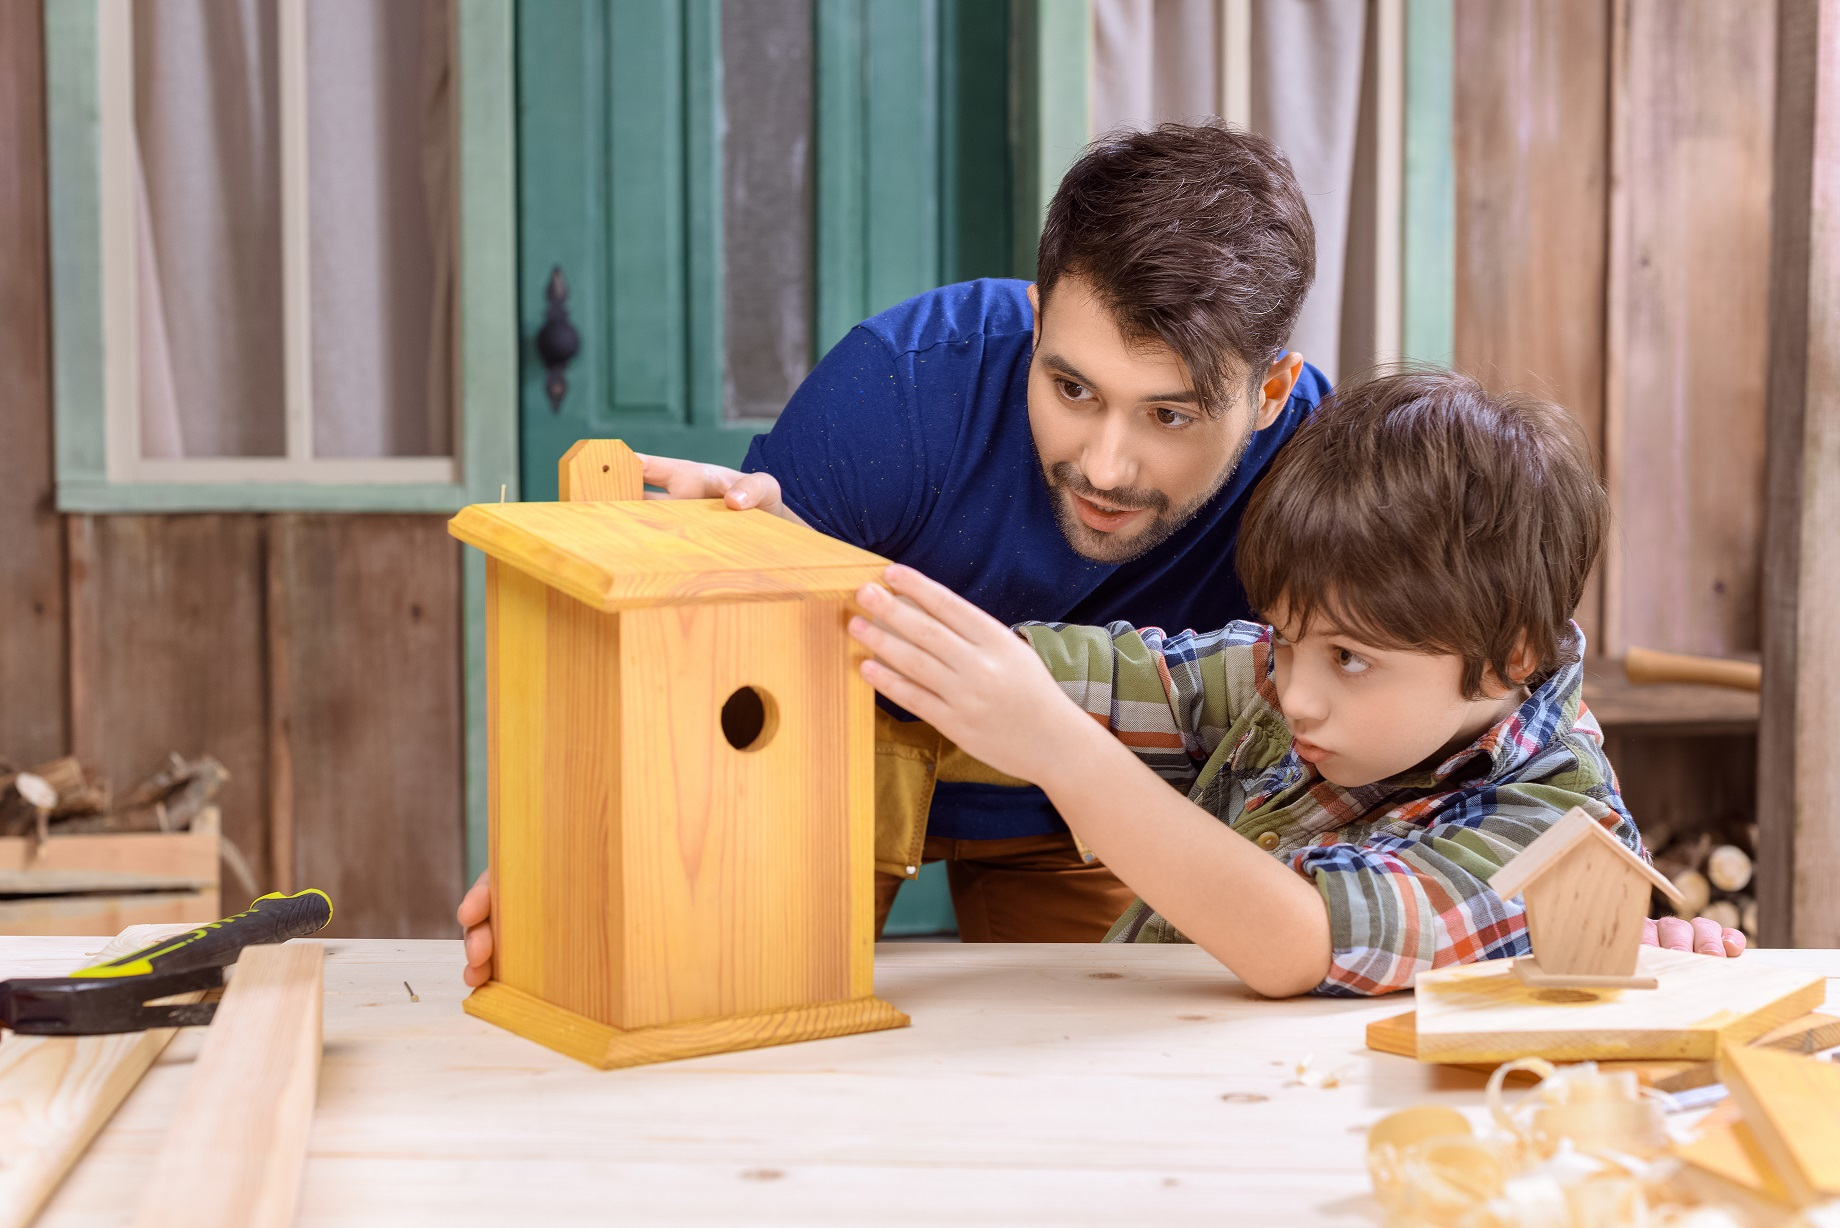 Concentrated father and son making wooden birdhouse together in workshop